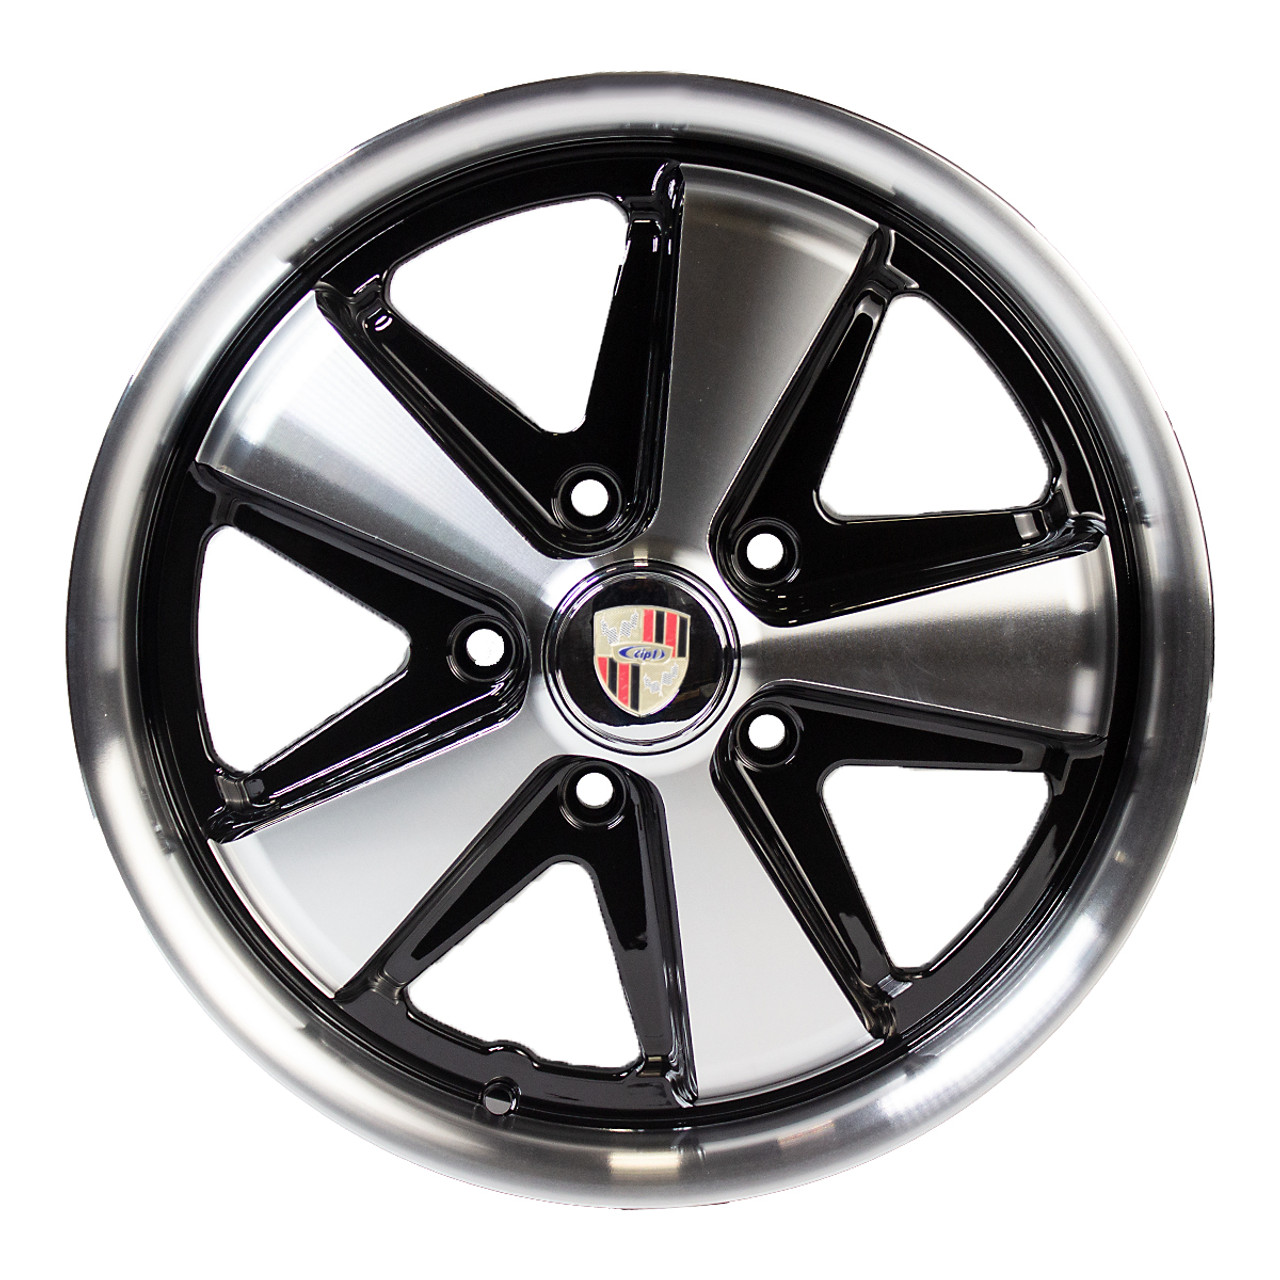 C32-4517FOO513036BMF - CIP1 EXCLUSIVE - 17 IN. X 4.5 IN. 911 STYLE ALUMINUM  - 5X130MM - ET 41MM - BLACK MACHINED FACE - CENTER CAPS INCLUDED - WHEEL 